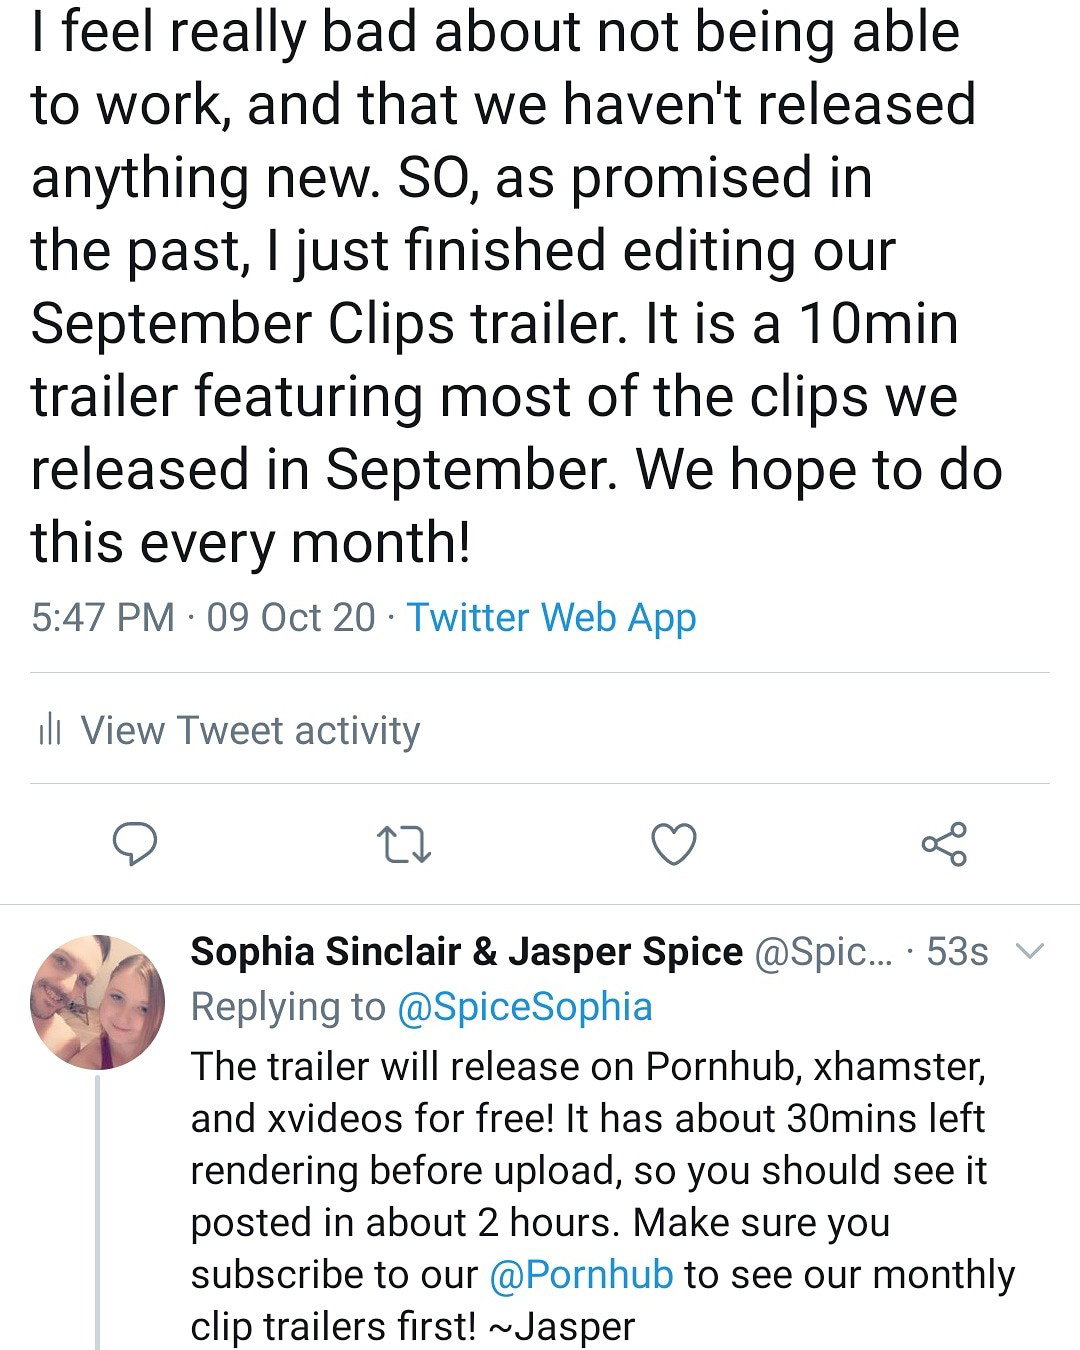 Photo by SpicedEnterprise with the username @spicesophia, who is a star user,  October 9, 2020 at 10:53 PM and the text says '#PHworthy #SinSpice #jasperspice #Spicesophia #SophiaAndjasper #sophiasinclair #SpicedEnterprise #trailer'